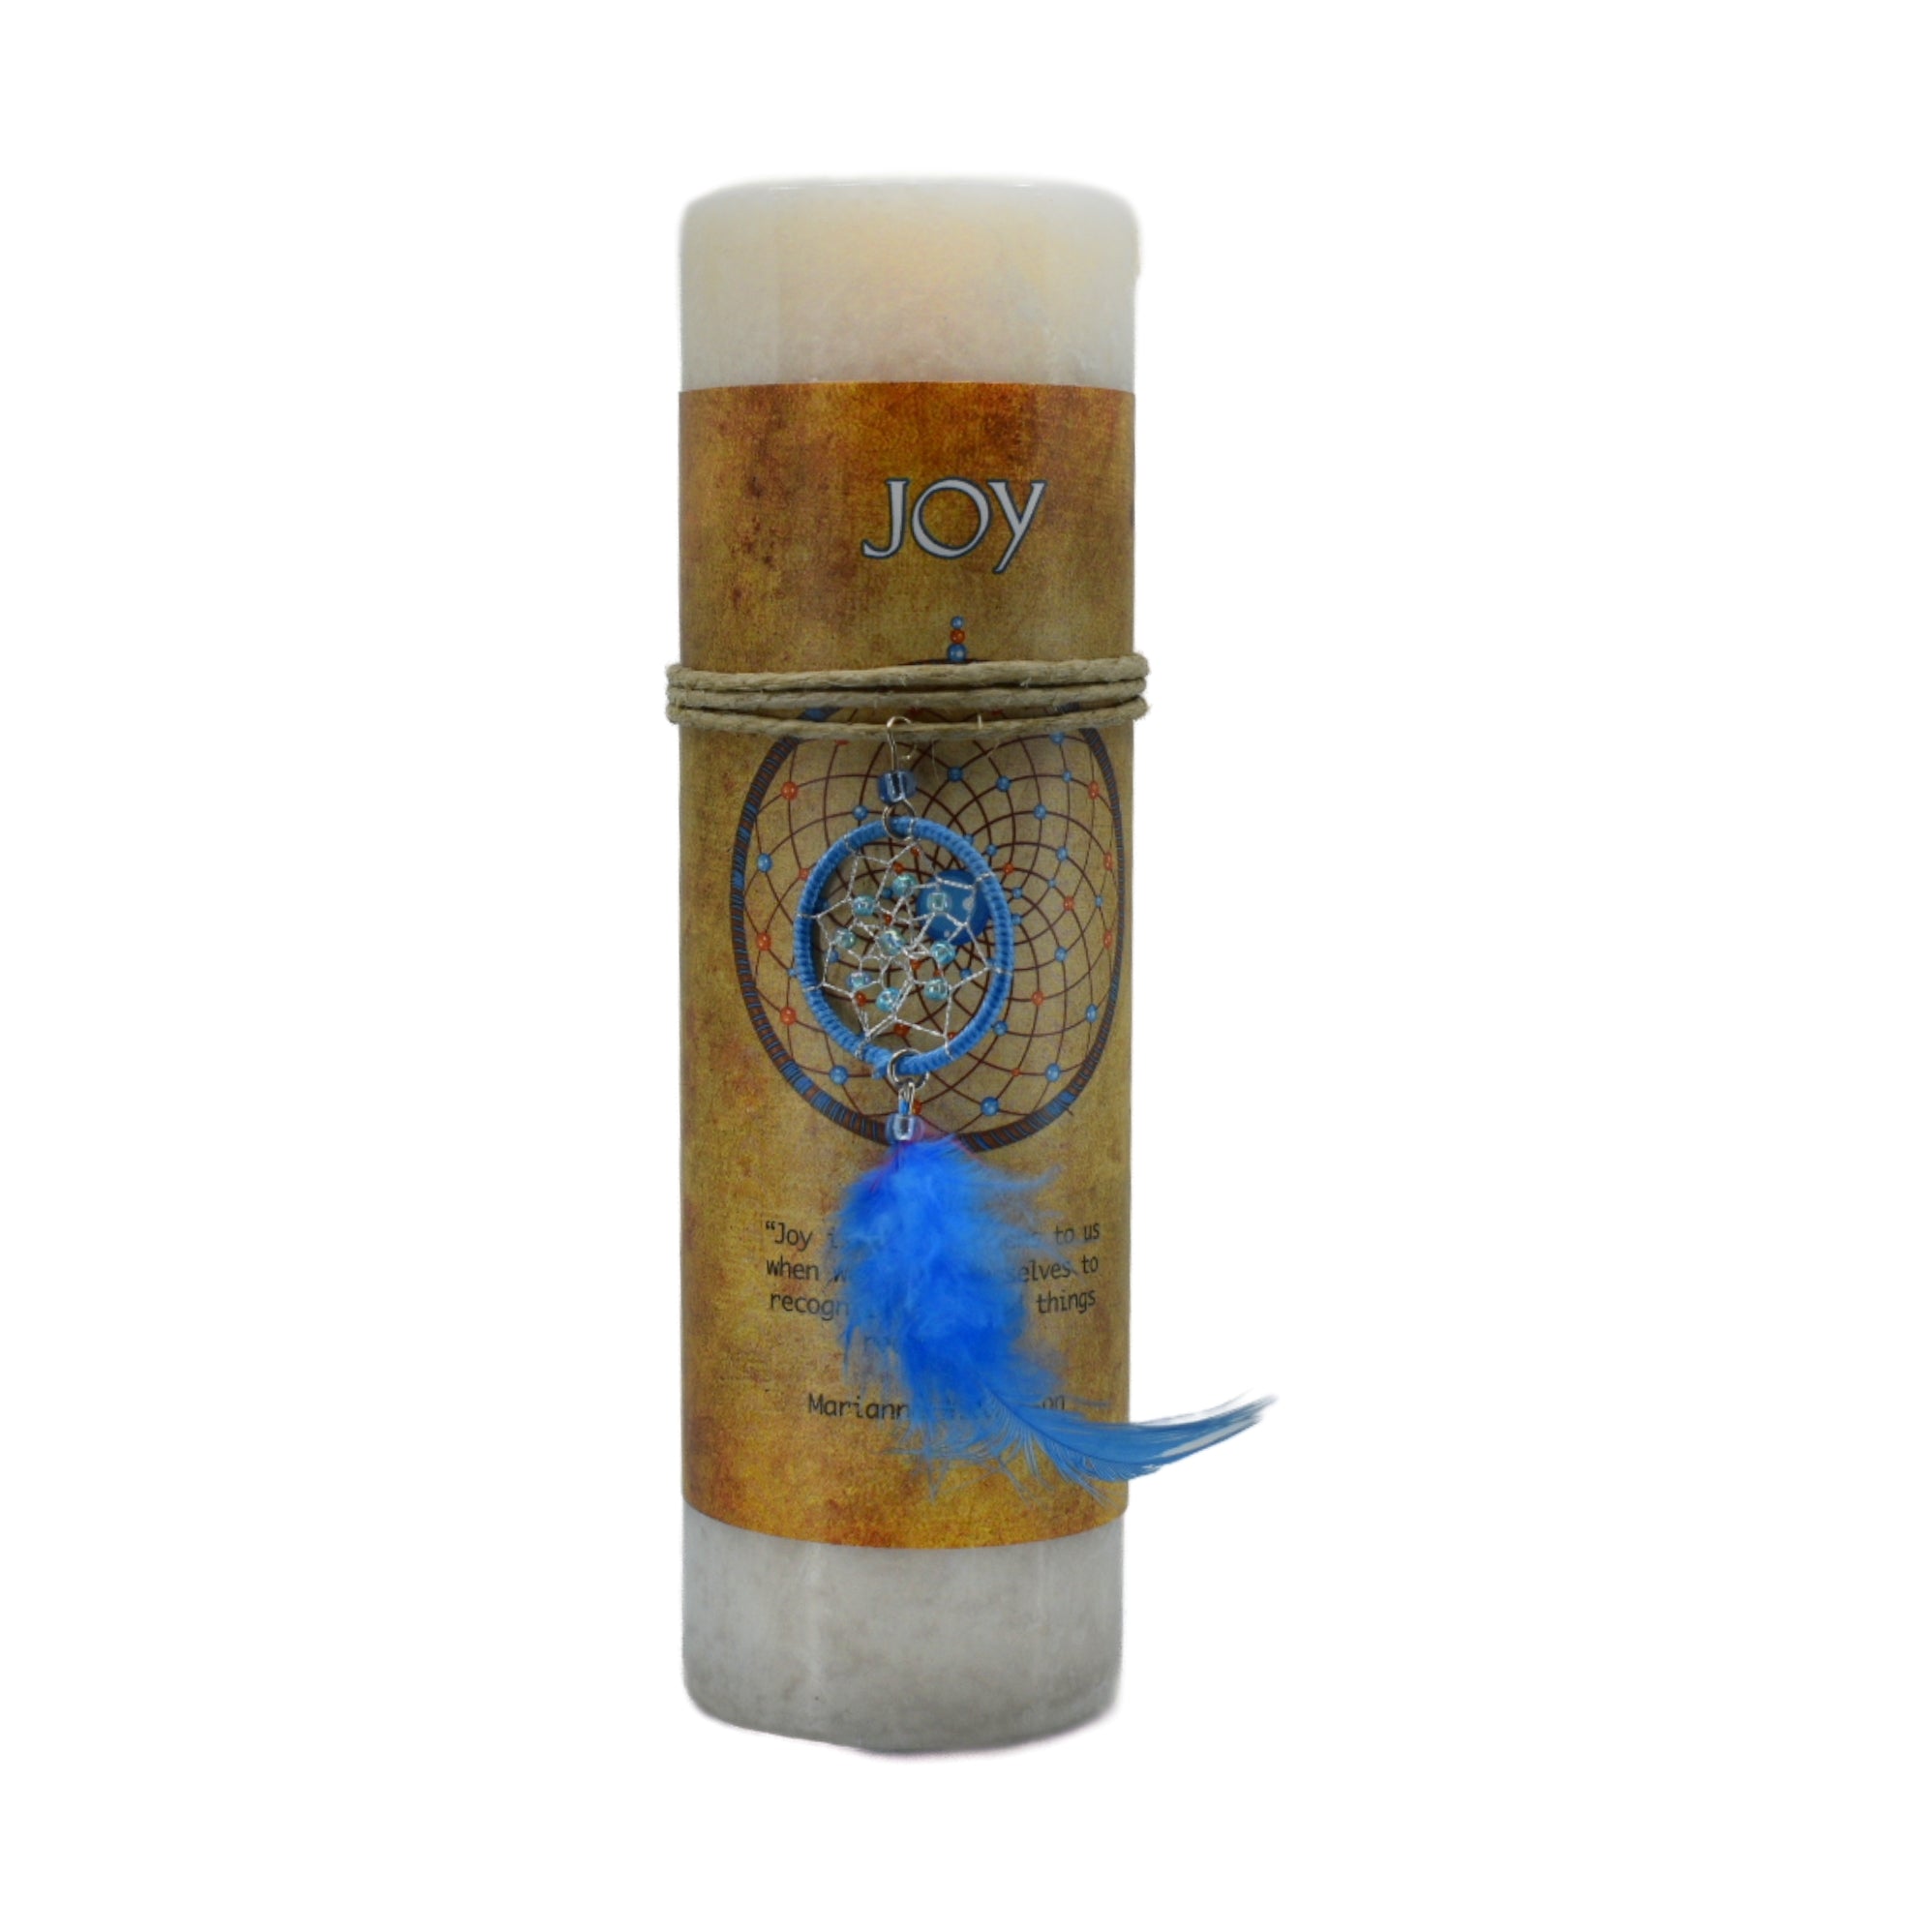 Joy Dream Catcher Candle.  Dream catcher is blue with a blue feather,  Candle is scented.  Light this candle to bring in joy.